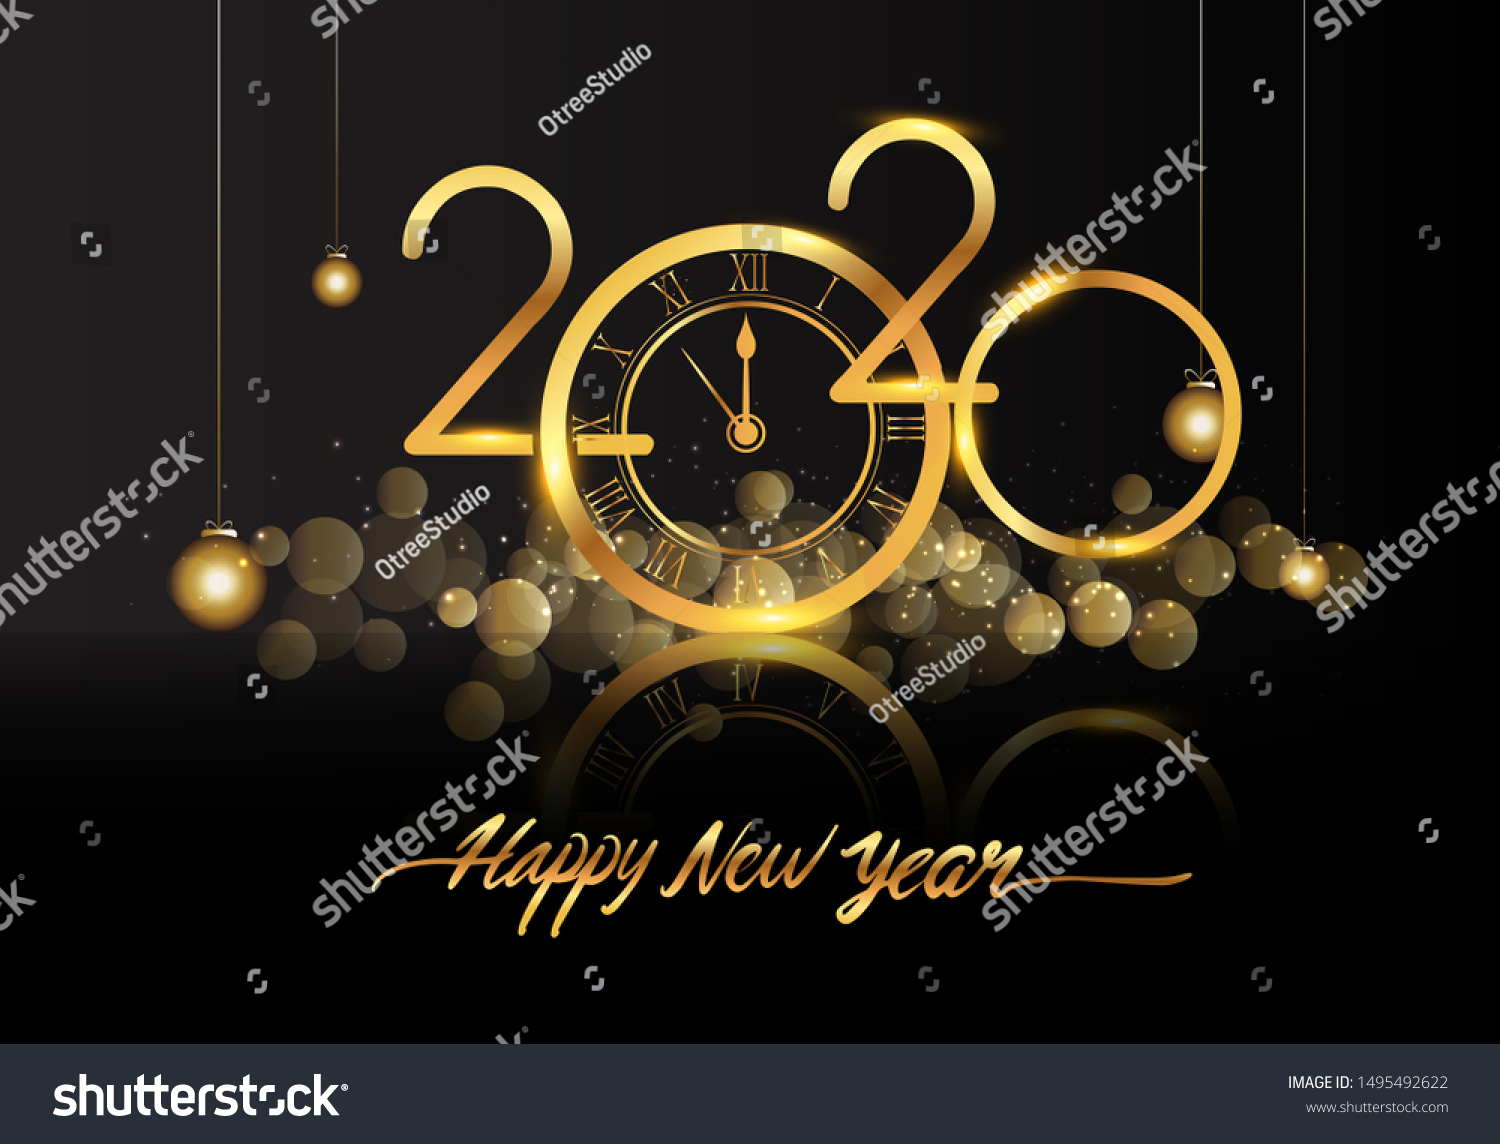 Happy New Year 2020 - New Year Shining background with gold clock and glitter.